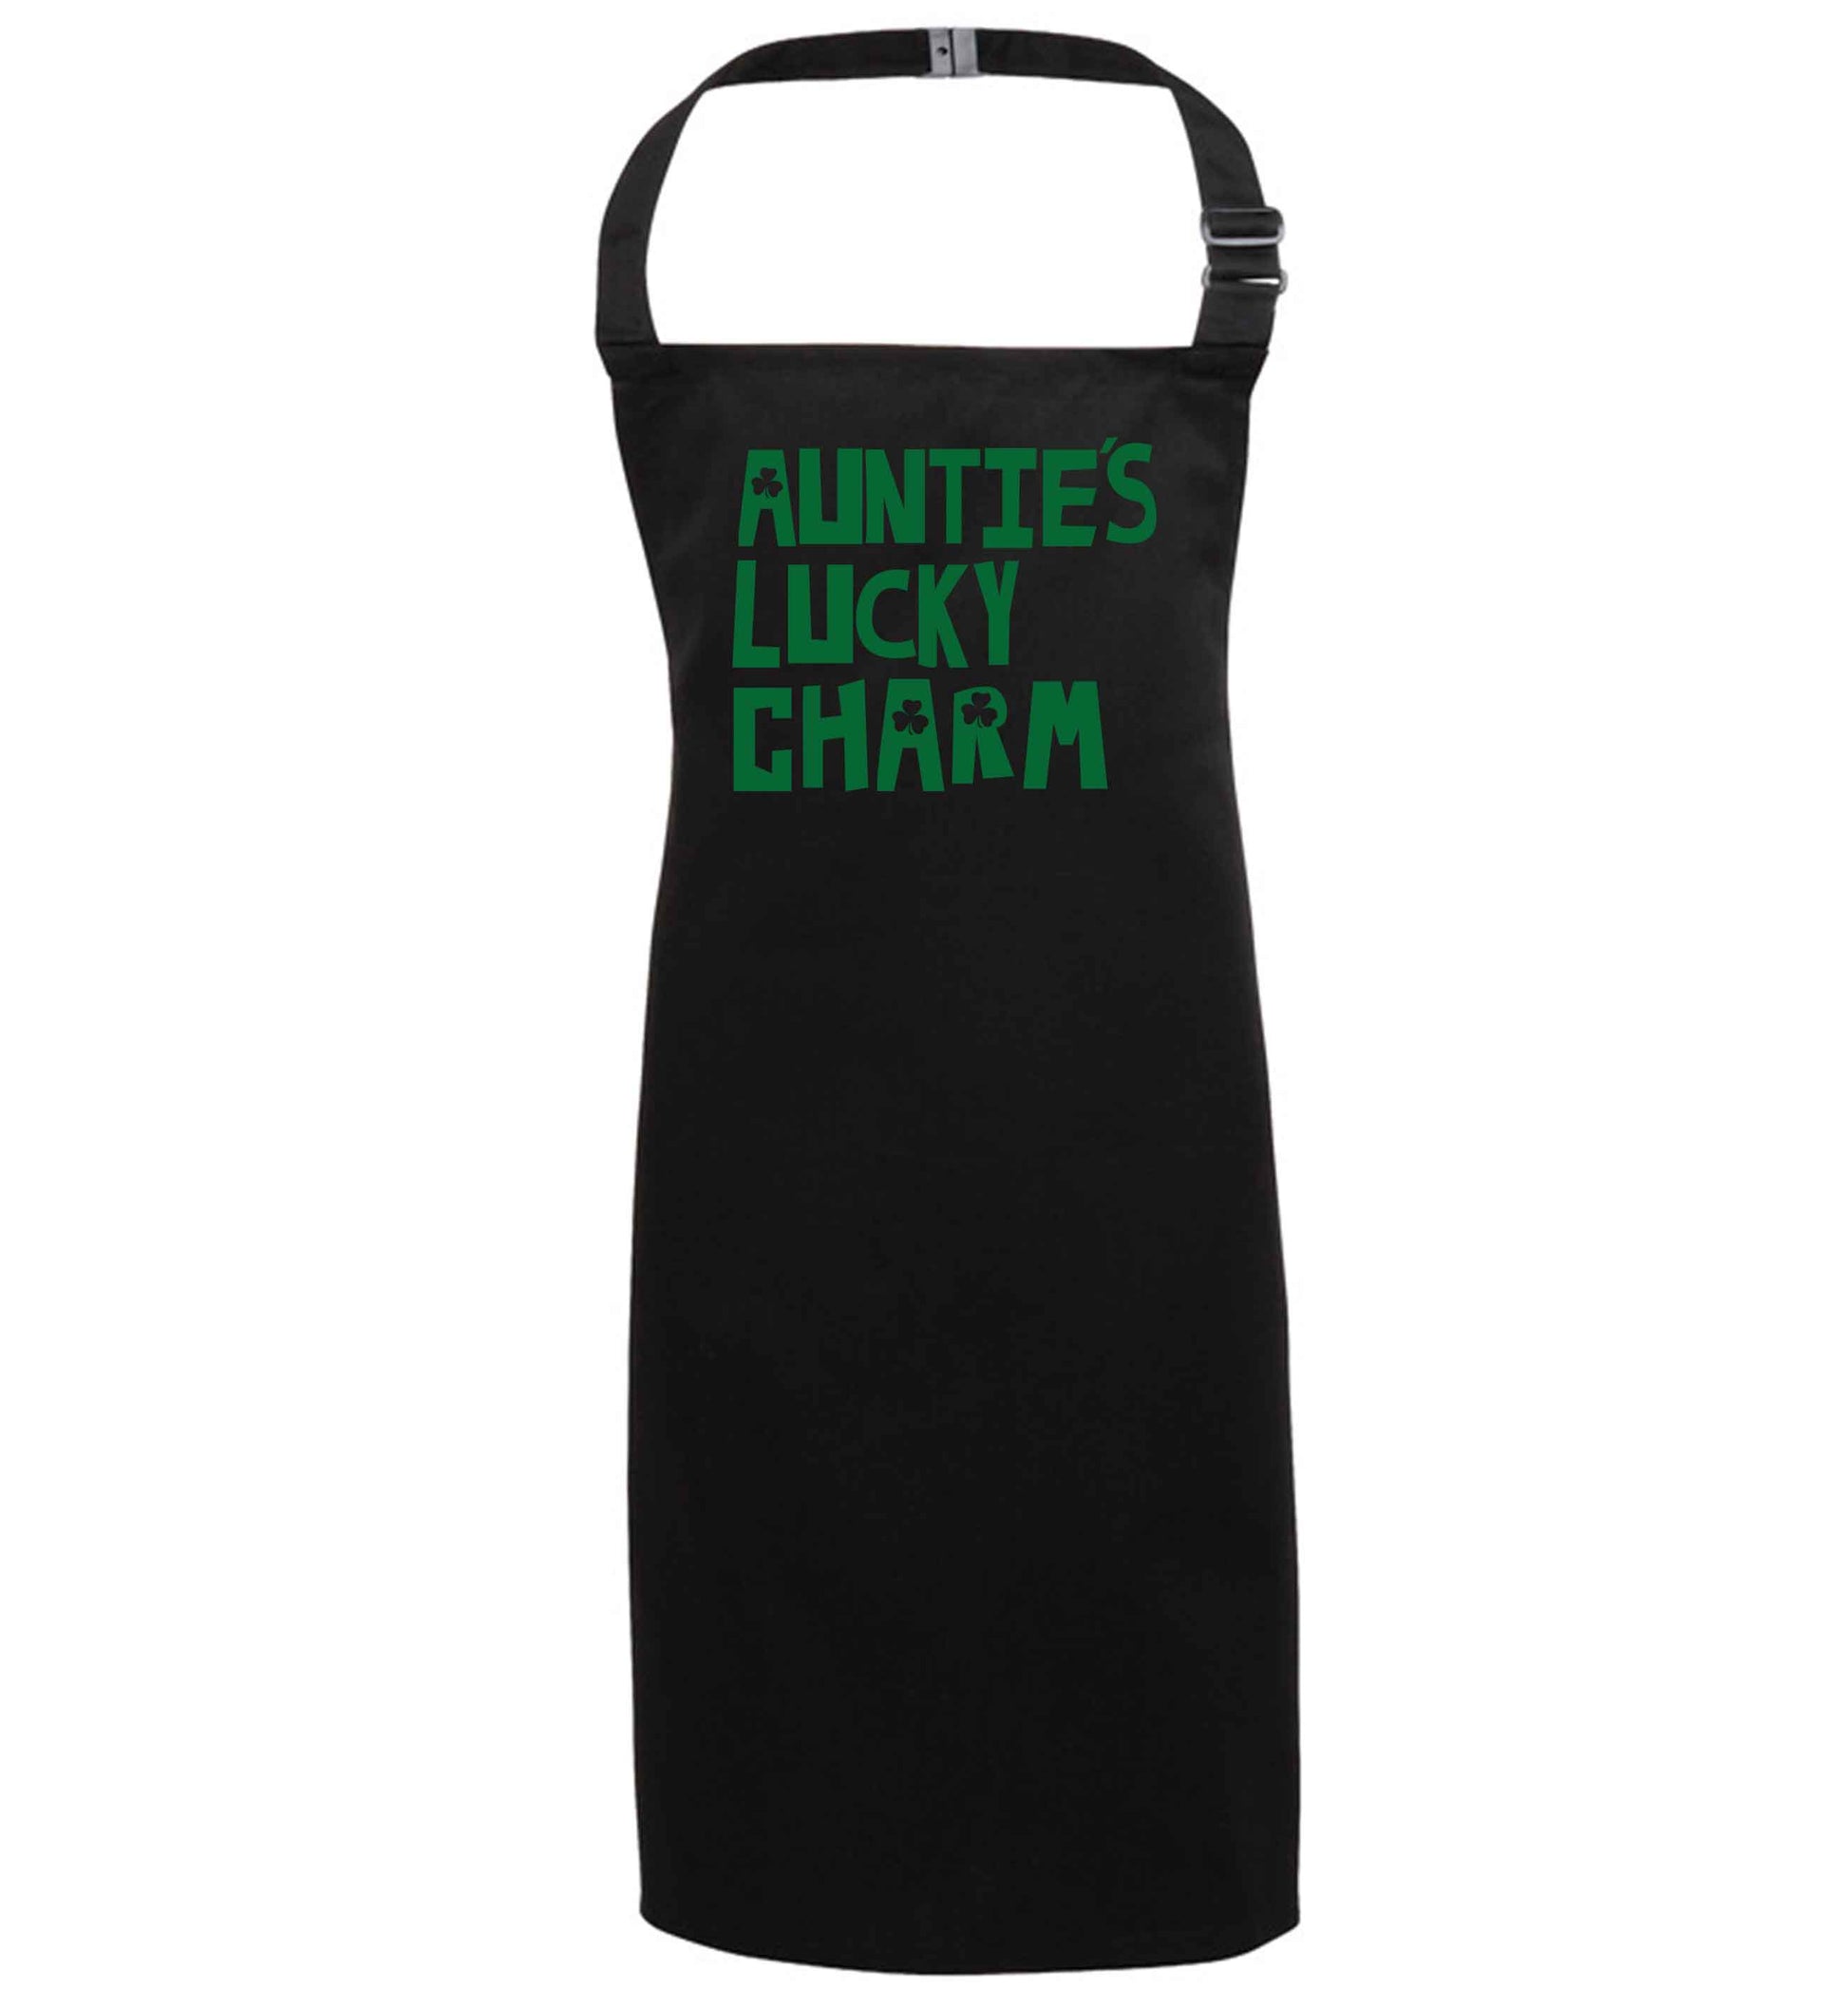 Auntie's lucky charm black apron 7-10 years